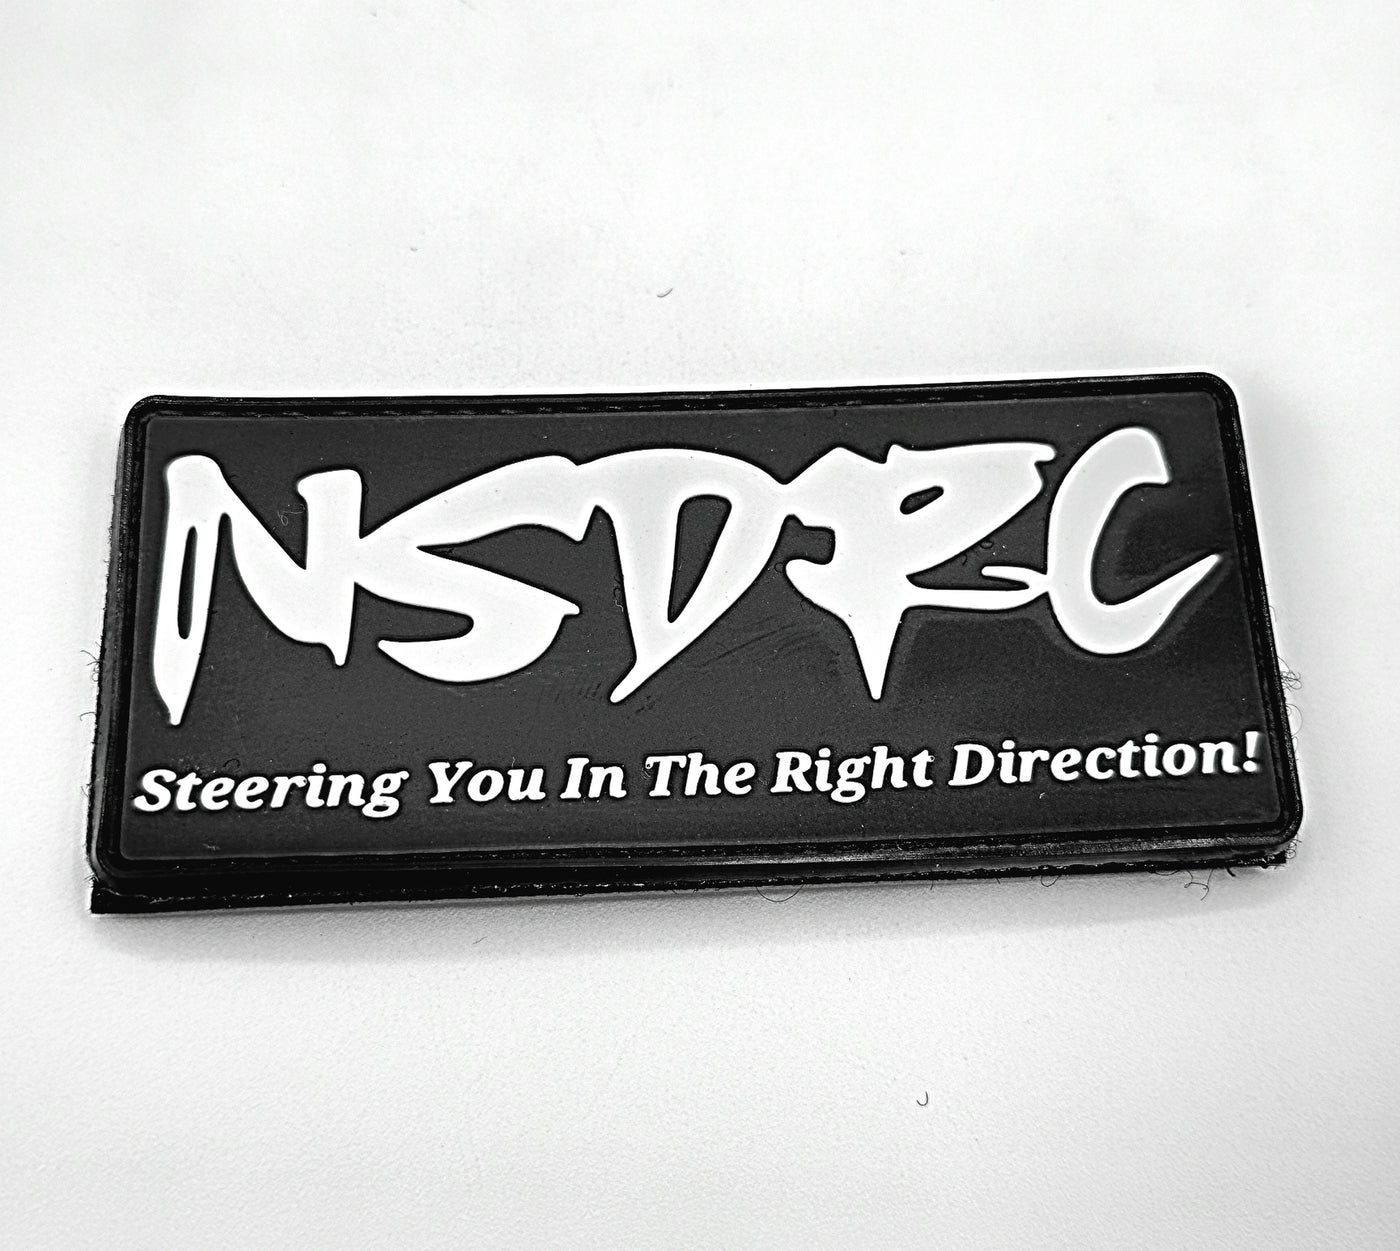 NSDRC Patches